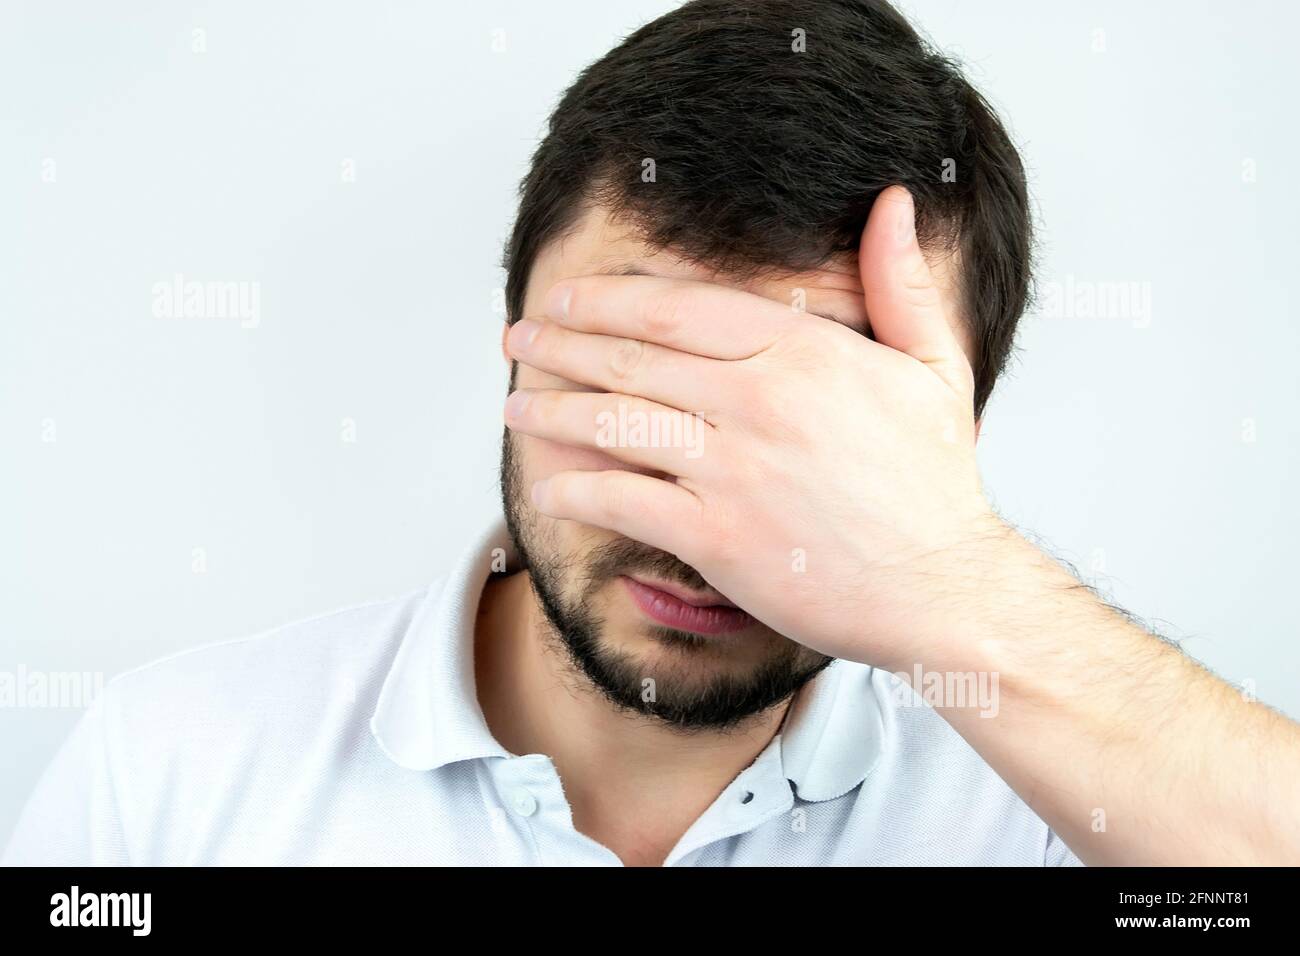 Closeup portrait of a bearded man holding palm over his face Stock Photo